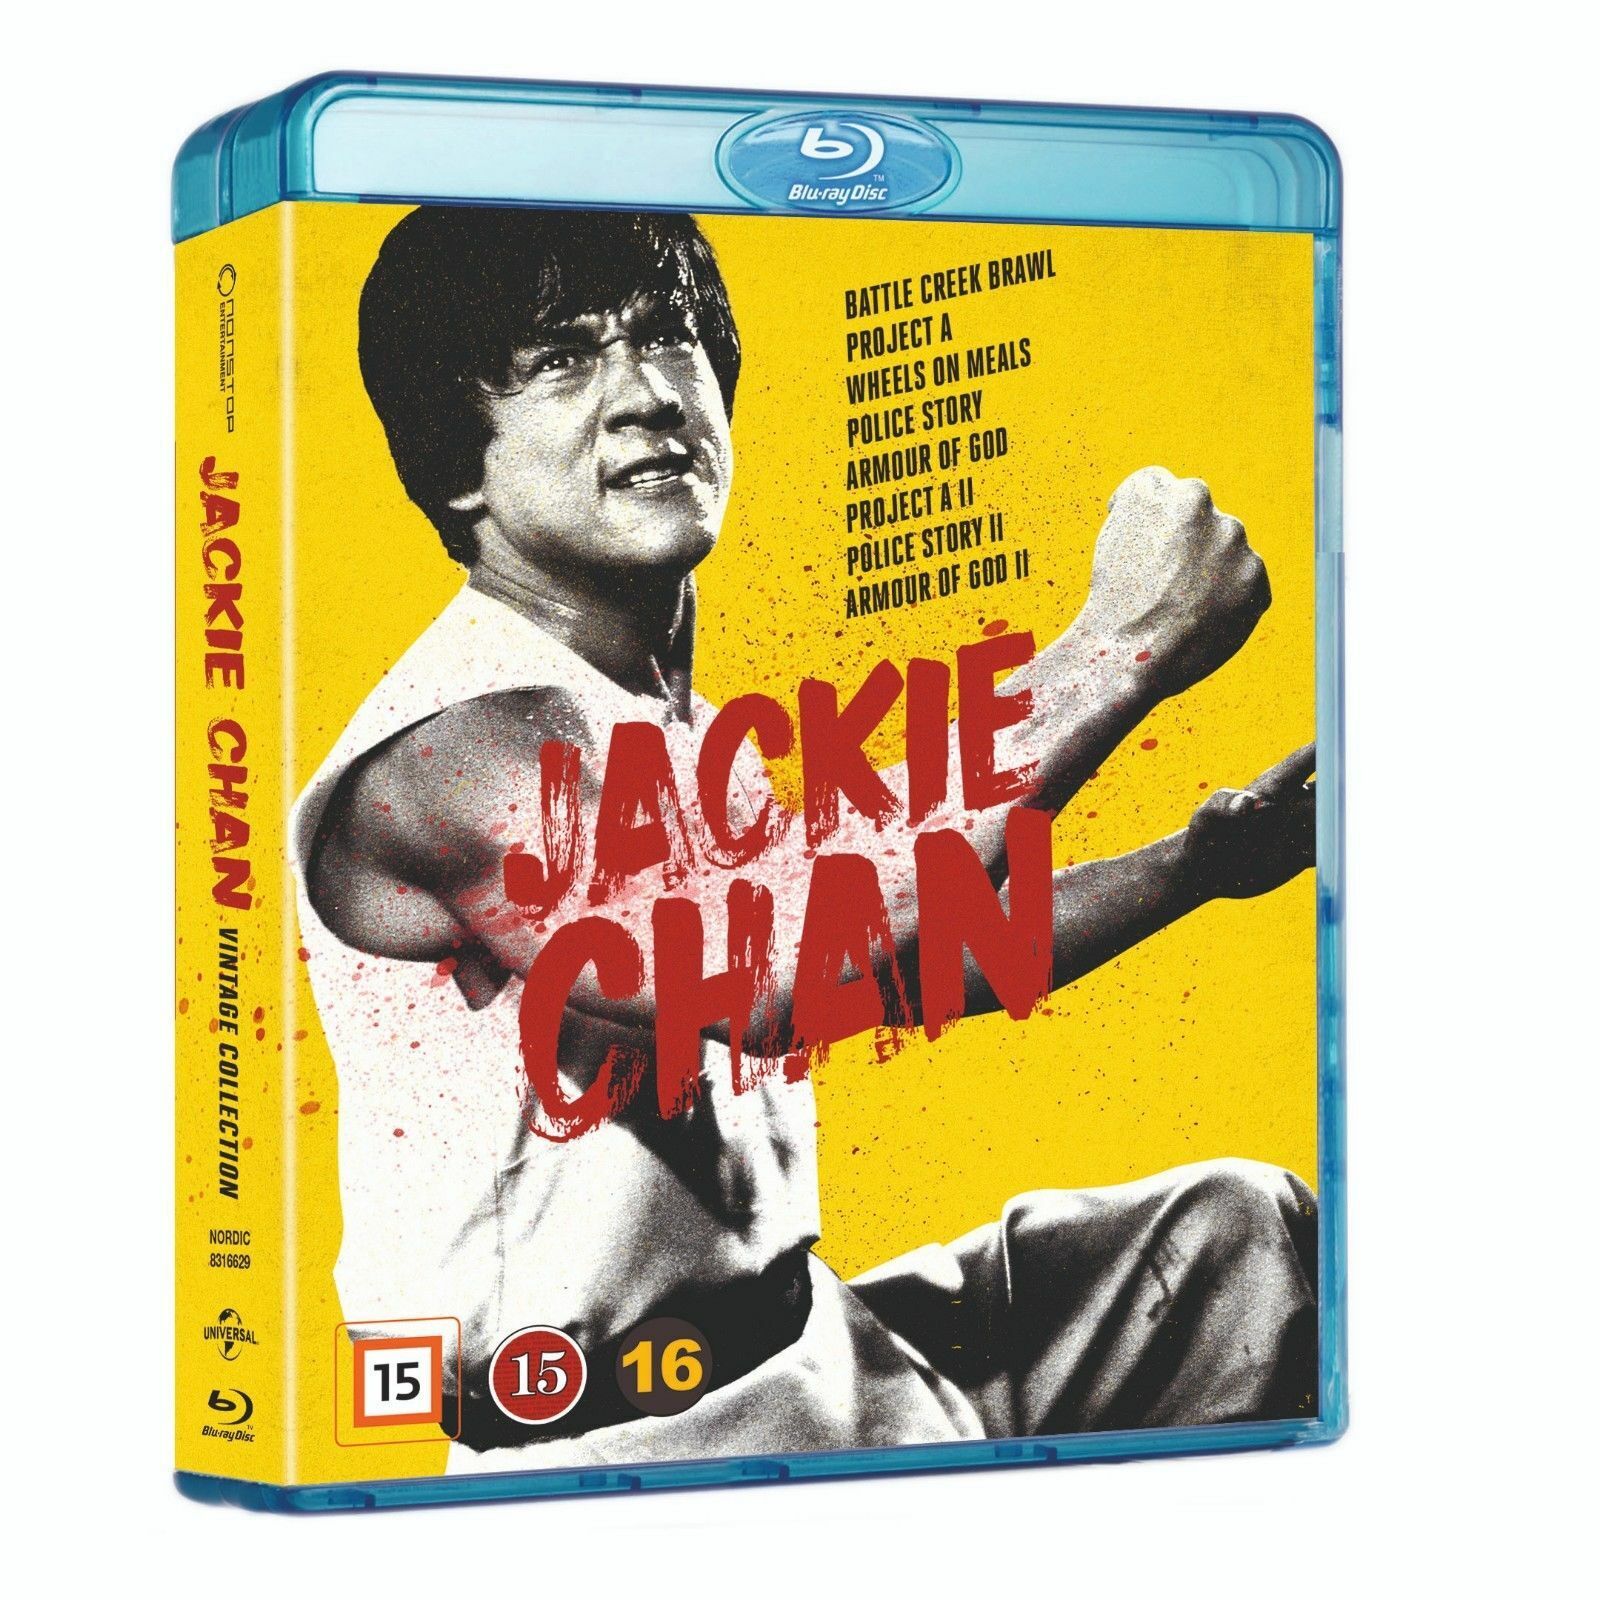 JACKIE CHAN VINTAGE COLLECTION 8 Movie Set Blu-Ray NEW (Region B Only/Not USA)